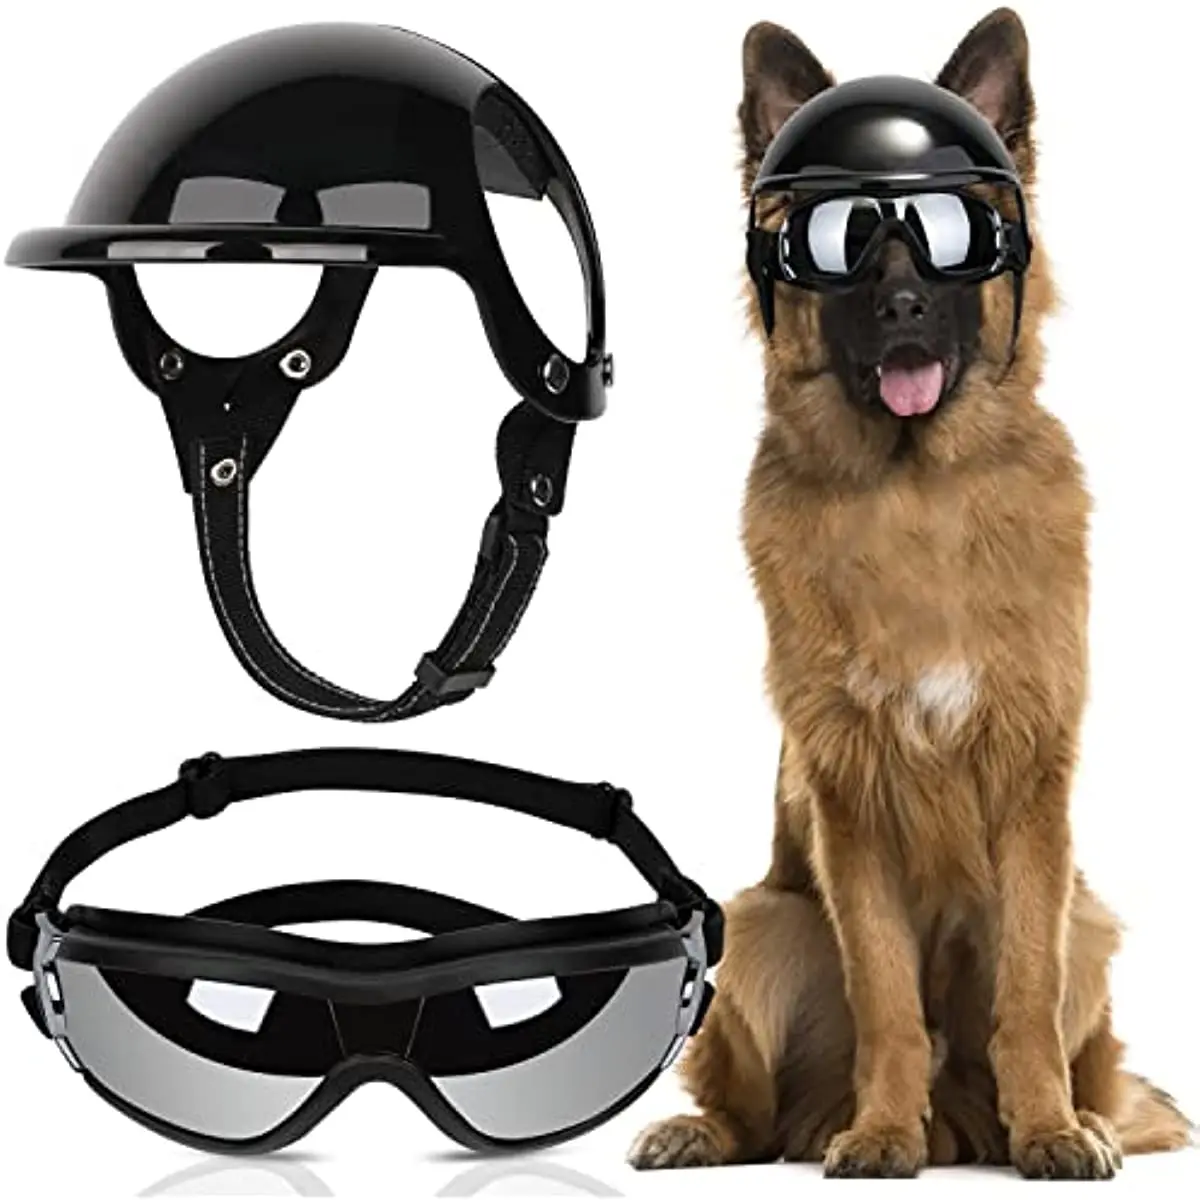 Dog Helmet And Goggles-UV Protection Doggy Sunglasses Dog Glasses Pet Hat Motorcycle Helmets Protection for Puppy Riding